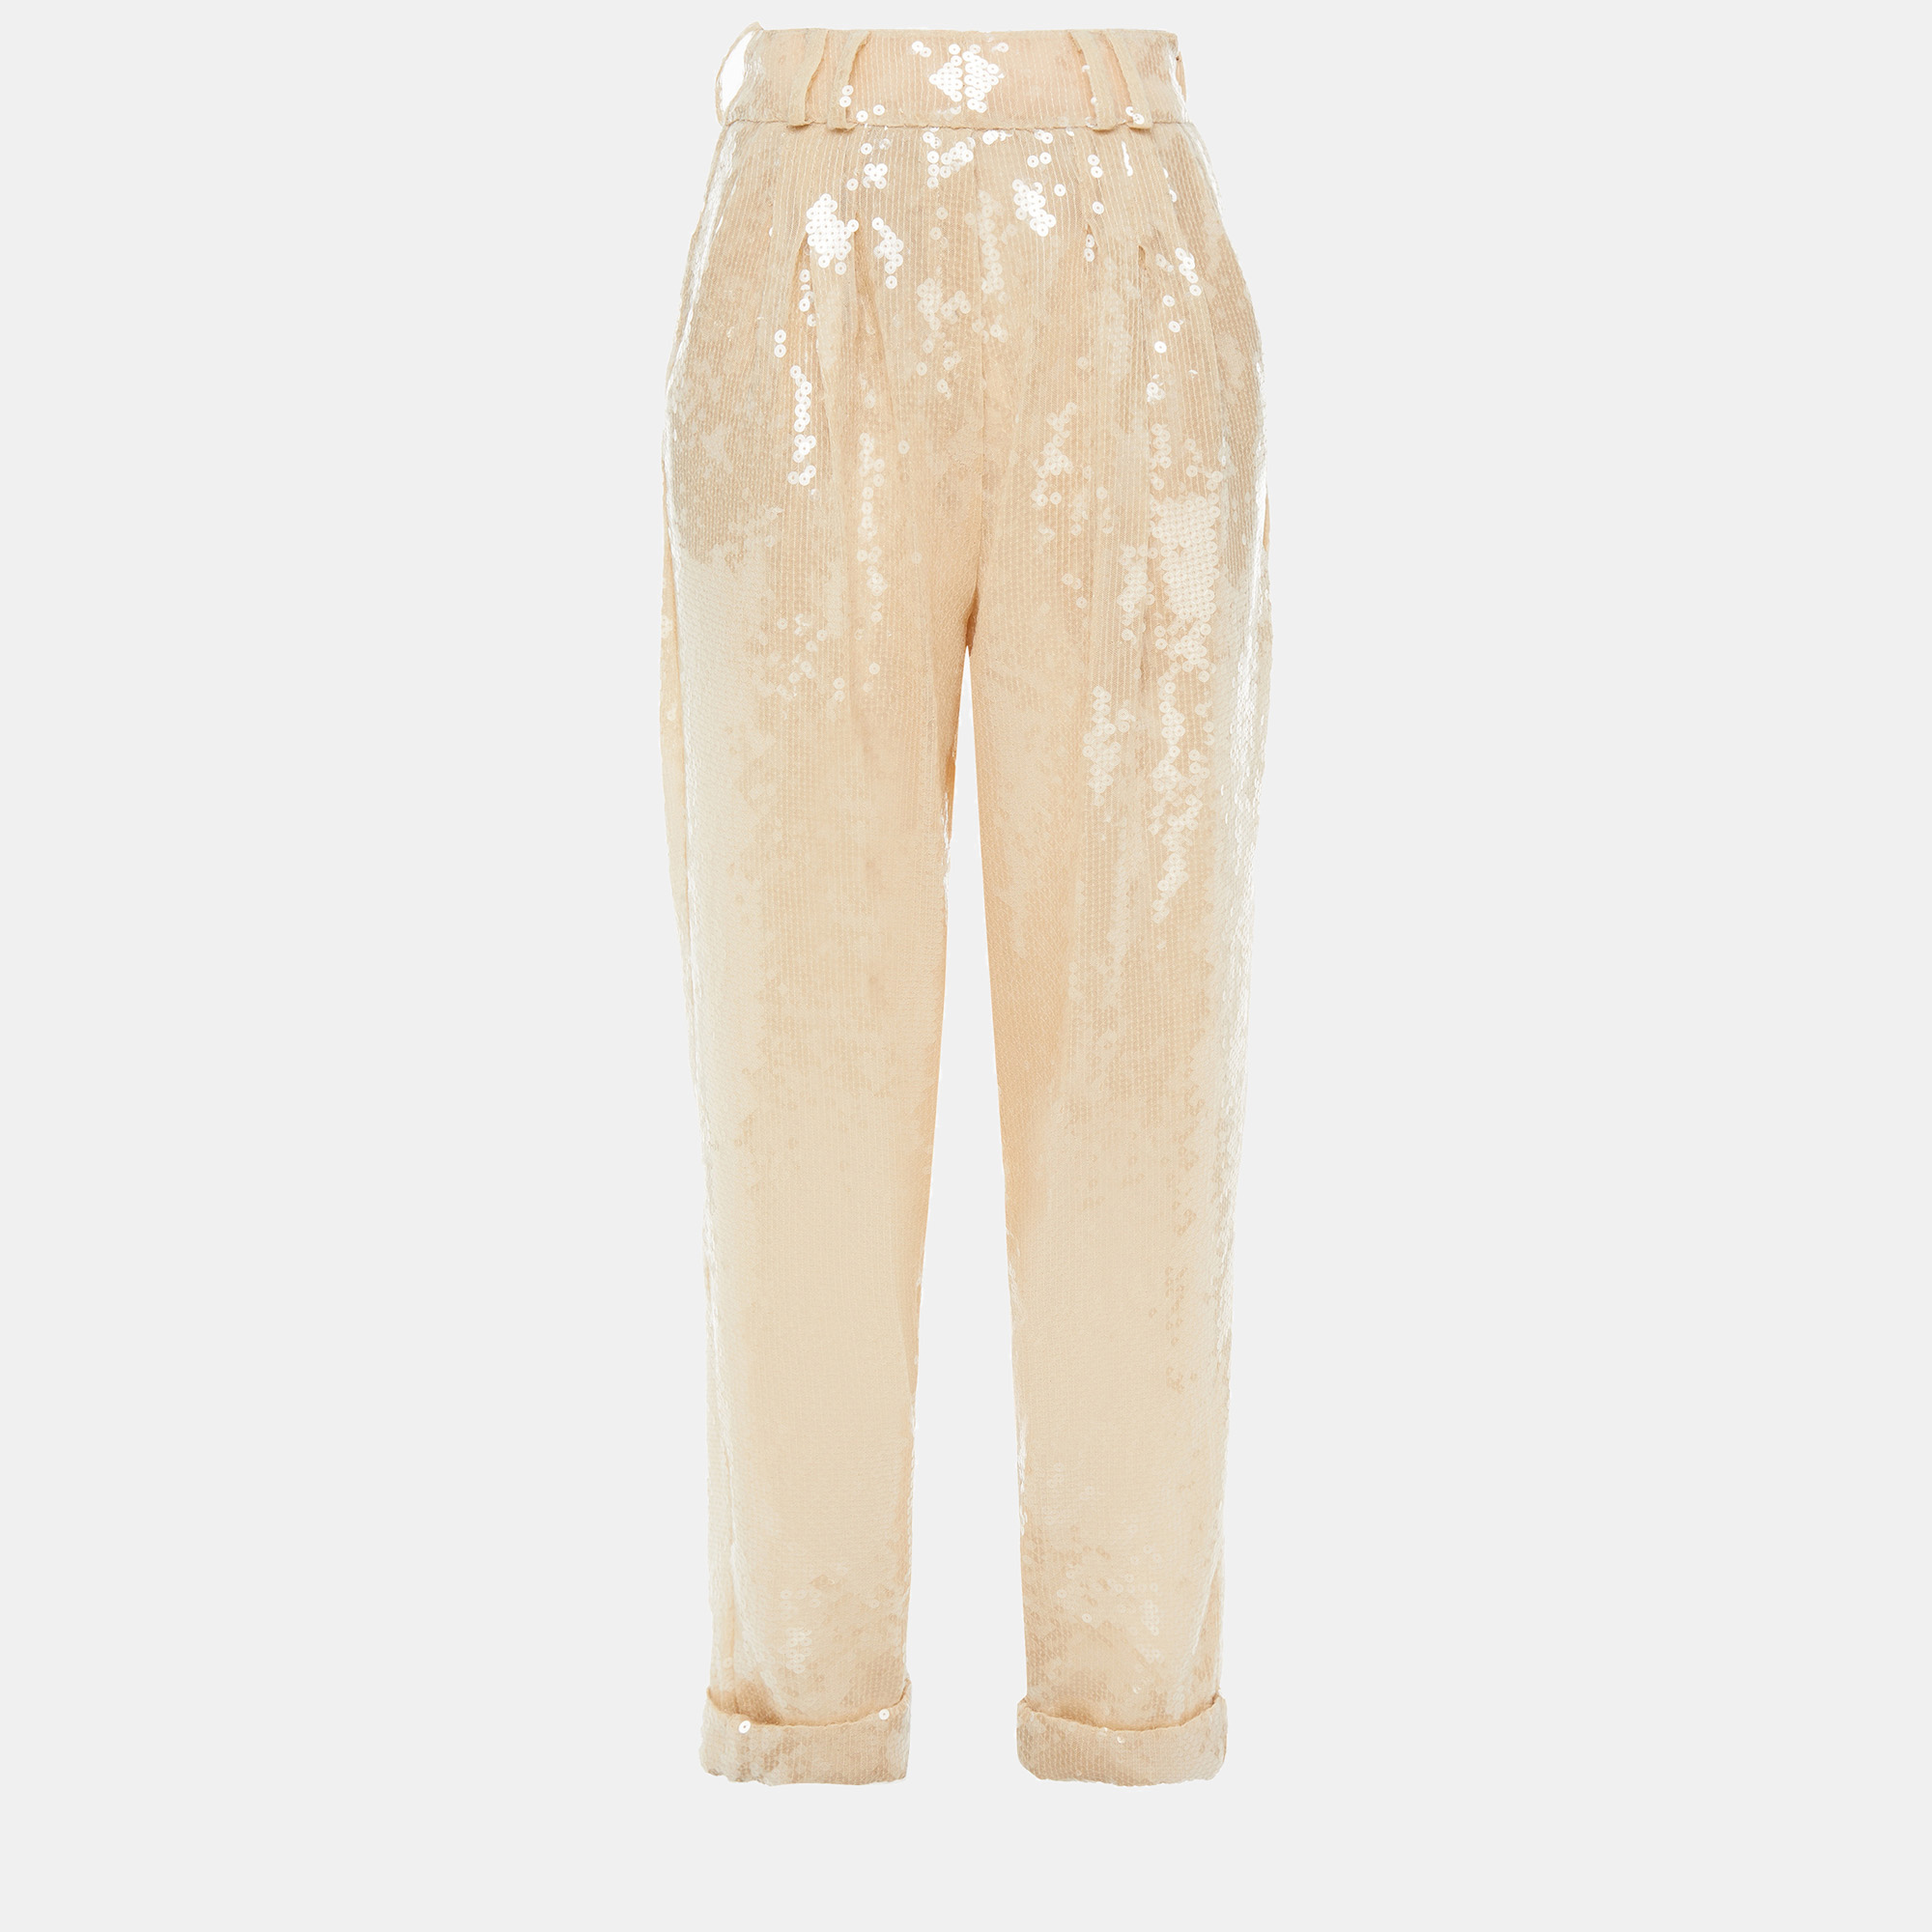 Balmain beige sequined tapered pants l (fr 40)